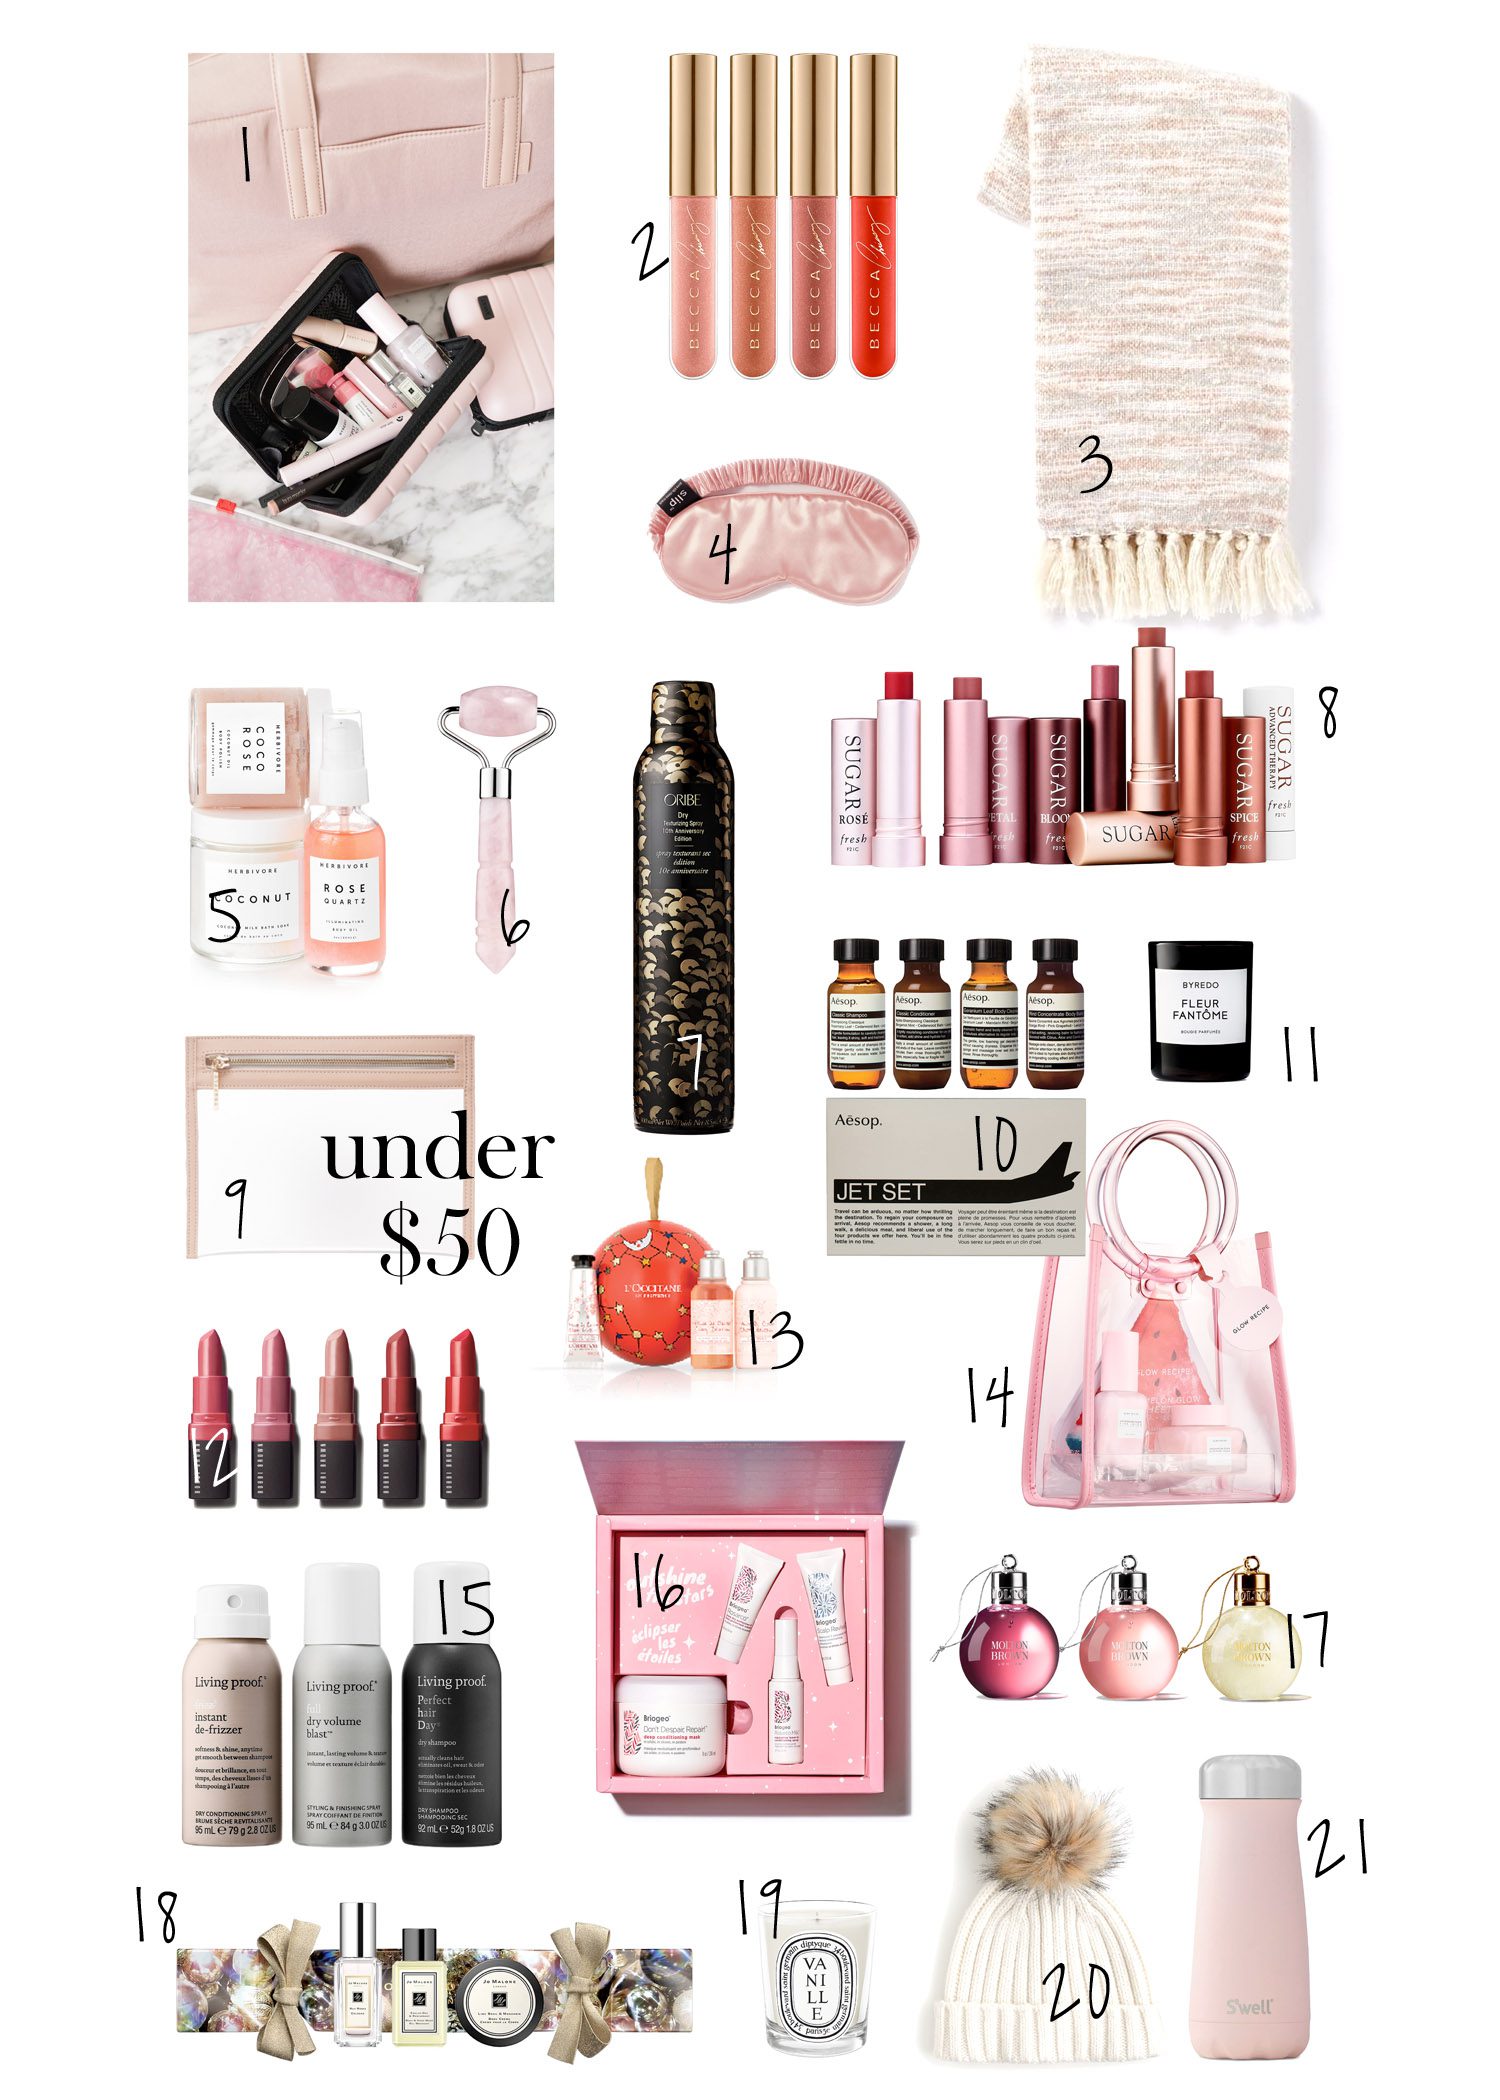 Holiday Gift Ideas for Her Under $50 - My Styled Life